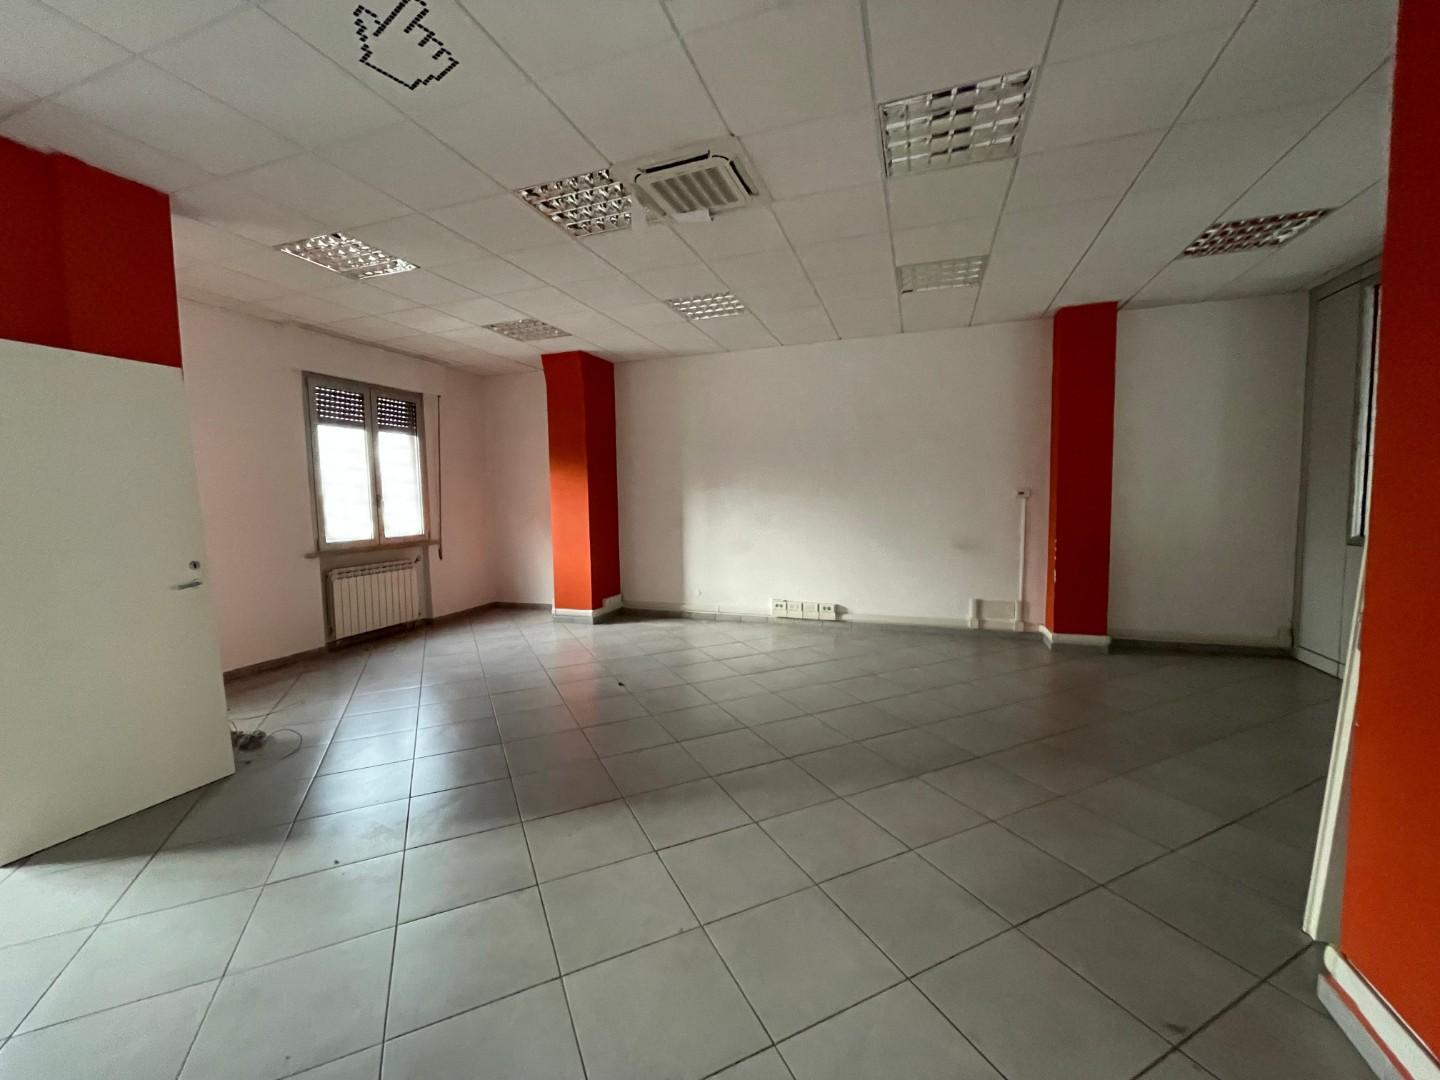 Business mall for sale in Poggibonsi (SI)